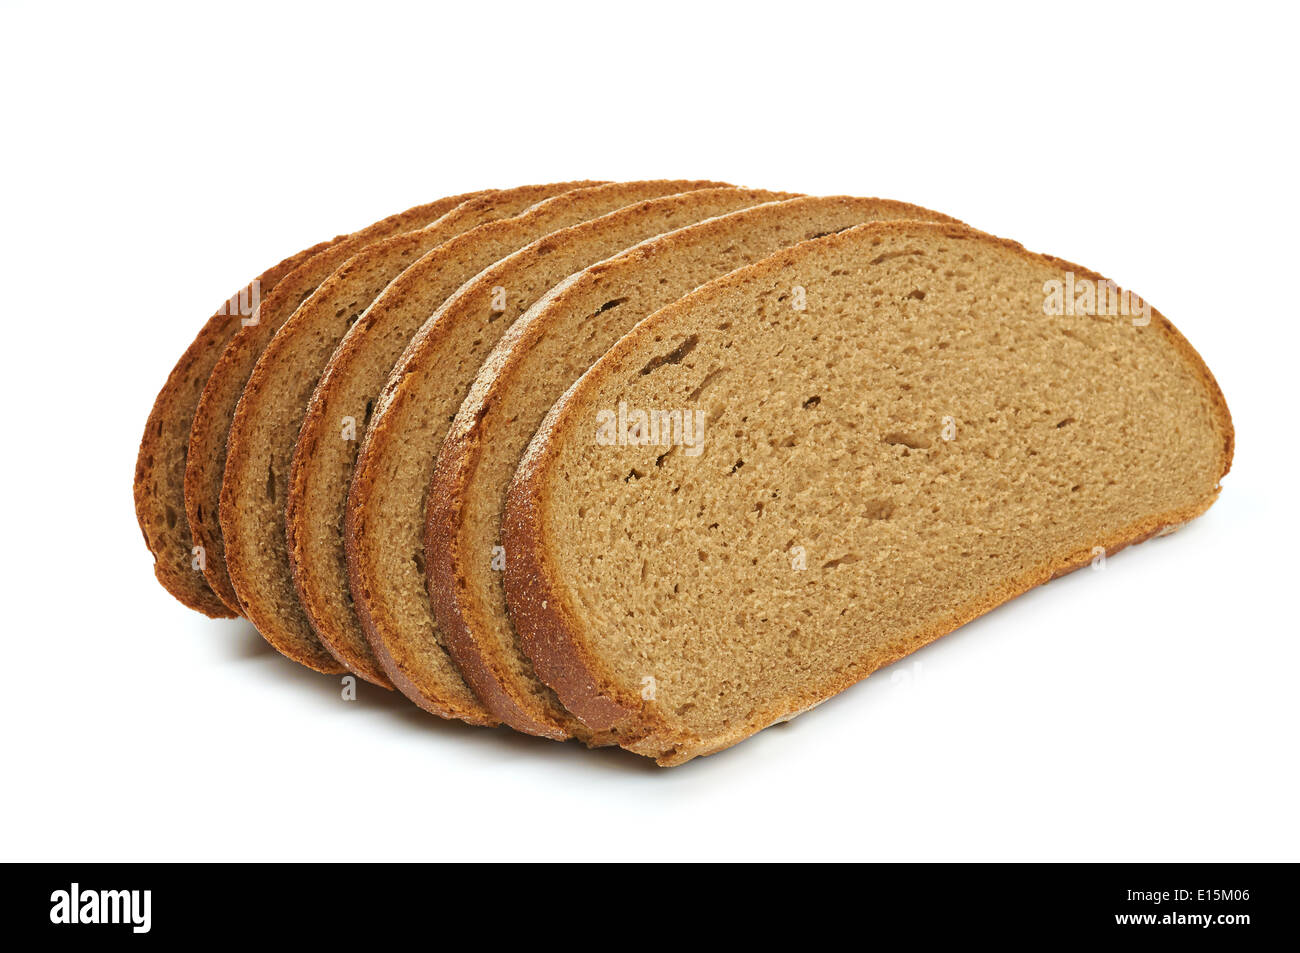 Sliced rye bread isolated on white background Stock Photo